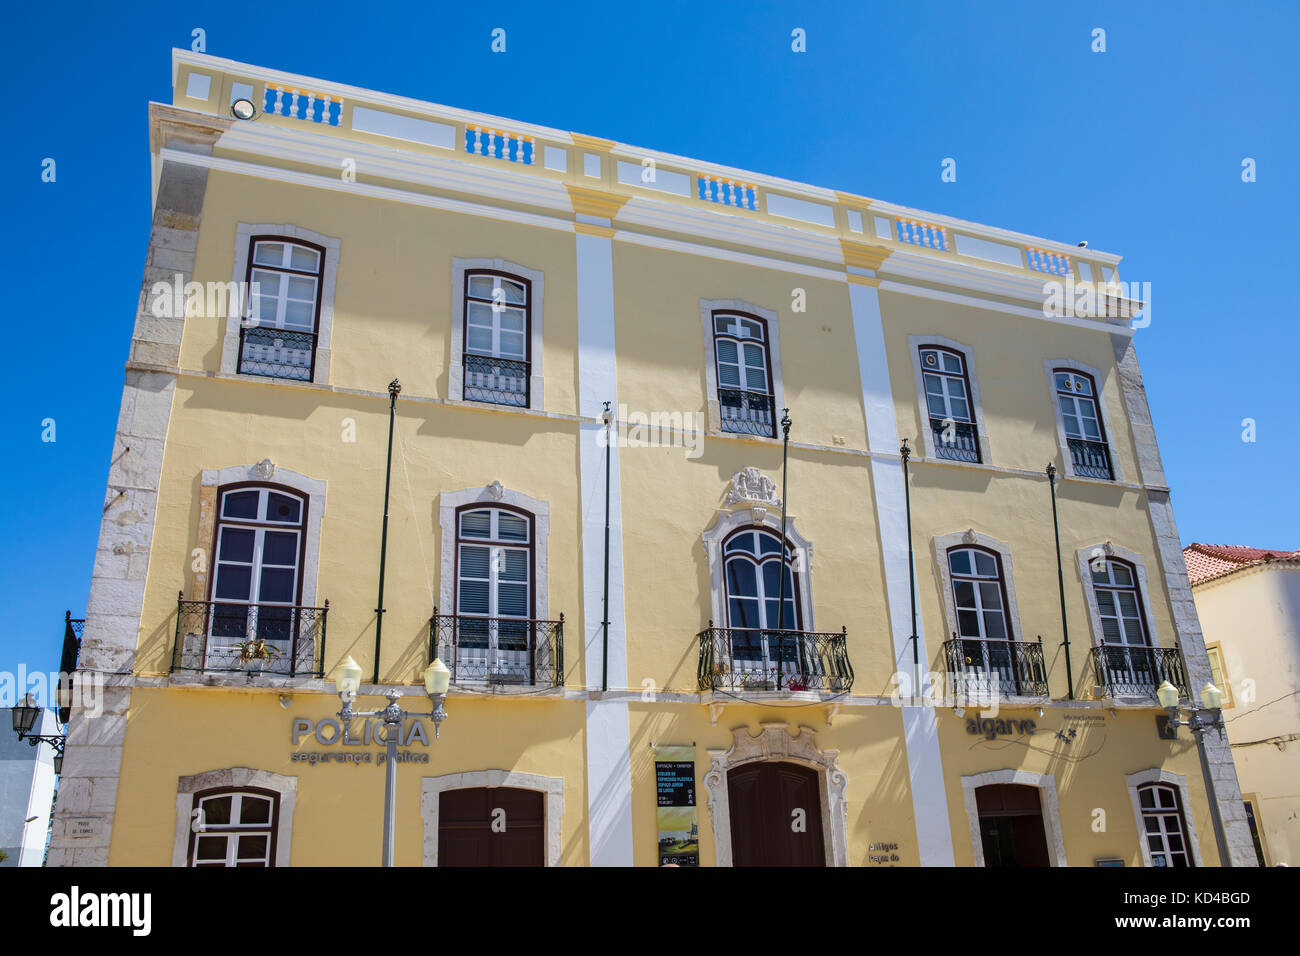 LAGOS, PORTUGAL - SEPTEMBER 10TH 2017: The building housing the Lagos Tourist Information, located on Praca Gil Eanes in Lagos, Portugal, on 10th Sept Stock Photo